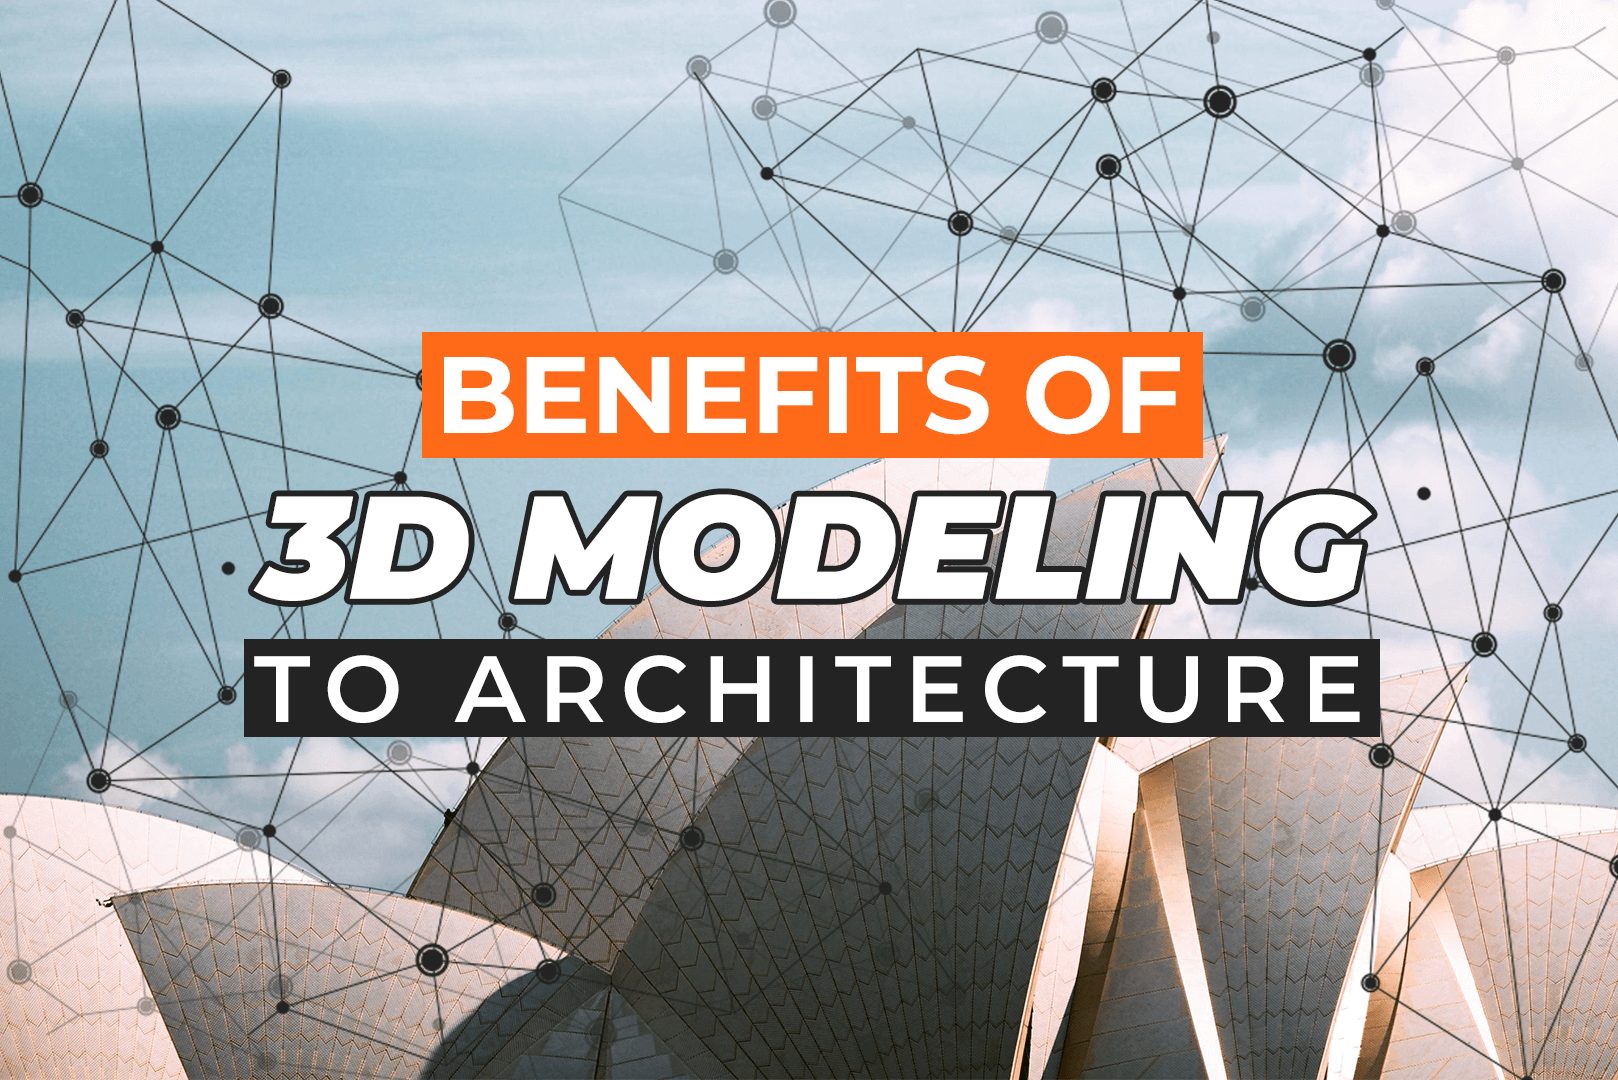 Benefits Of 3D Modeling To Architecture